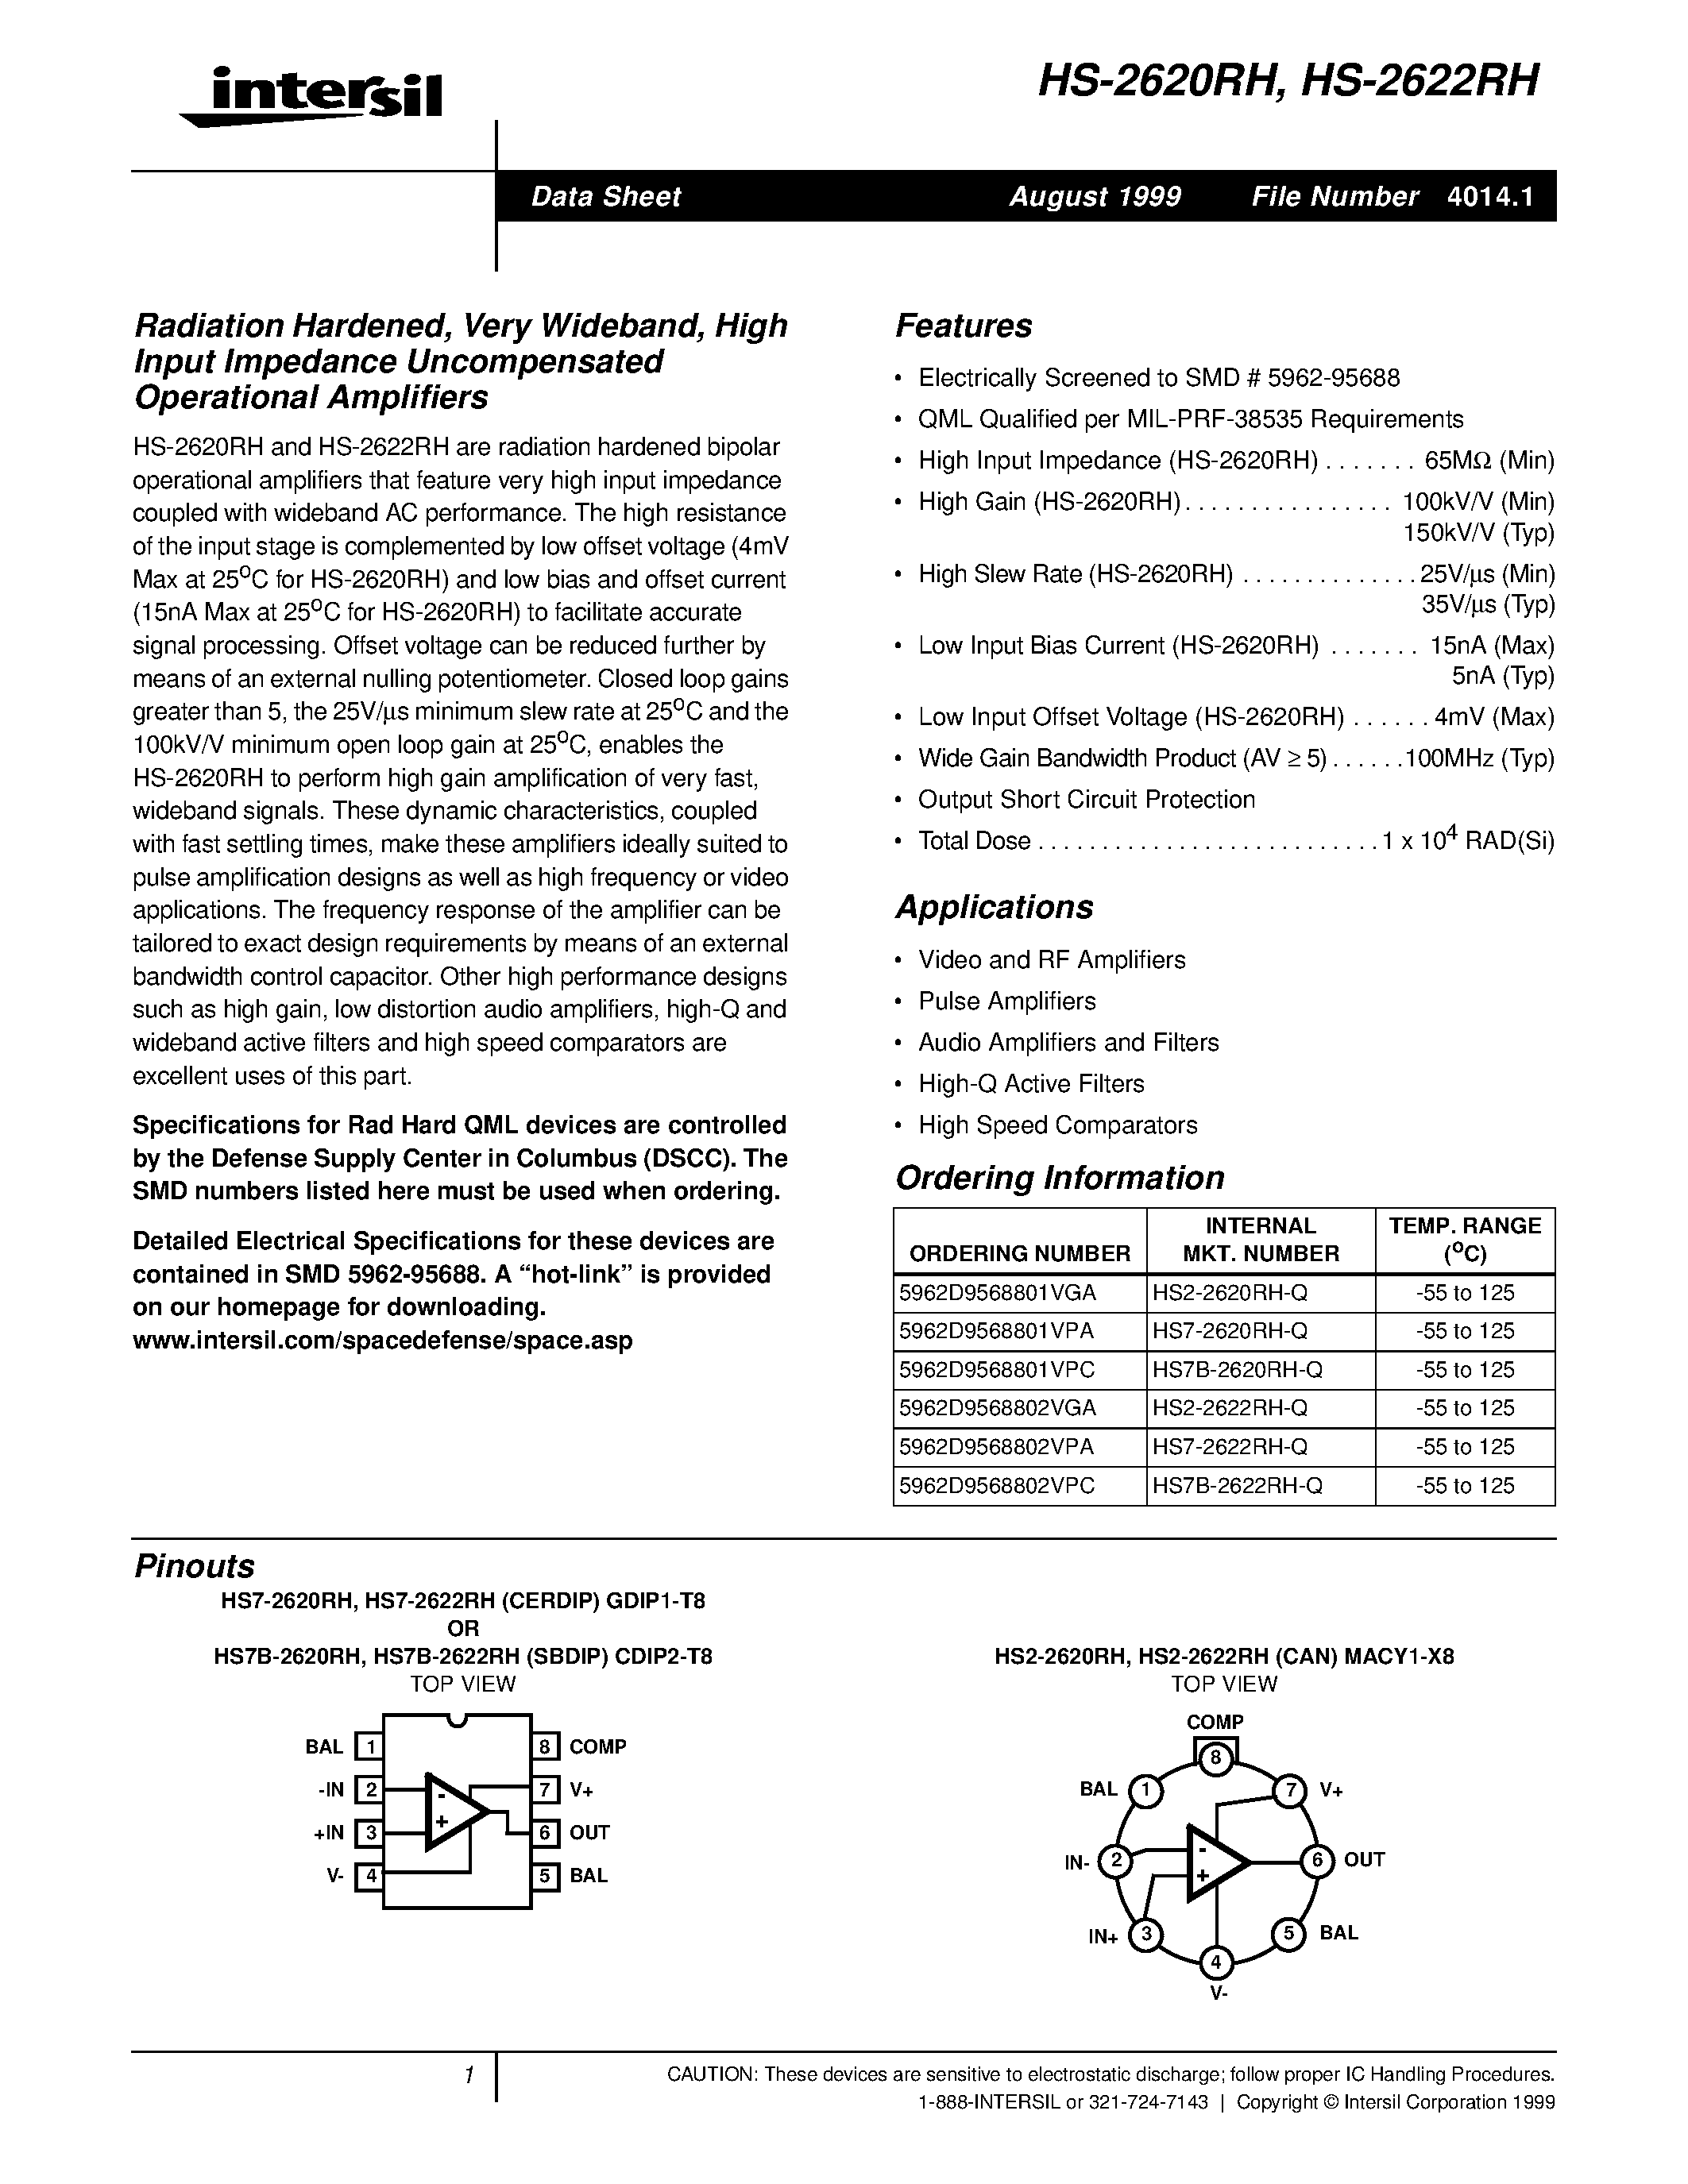 Datasheet HS2-2622RH-Q - Radiation Hardened/ Very Wideband/ High Input Impedance Uncompensated Operational Amplifiers page 1